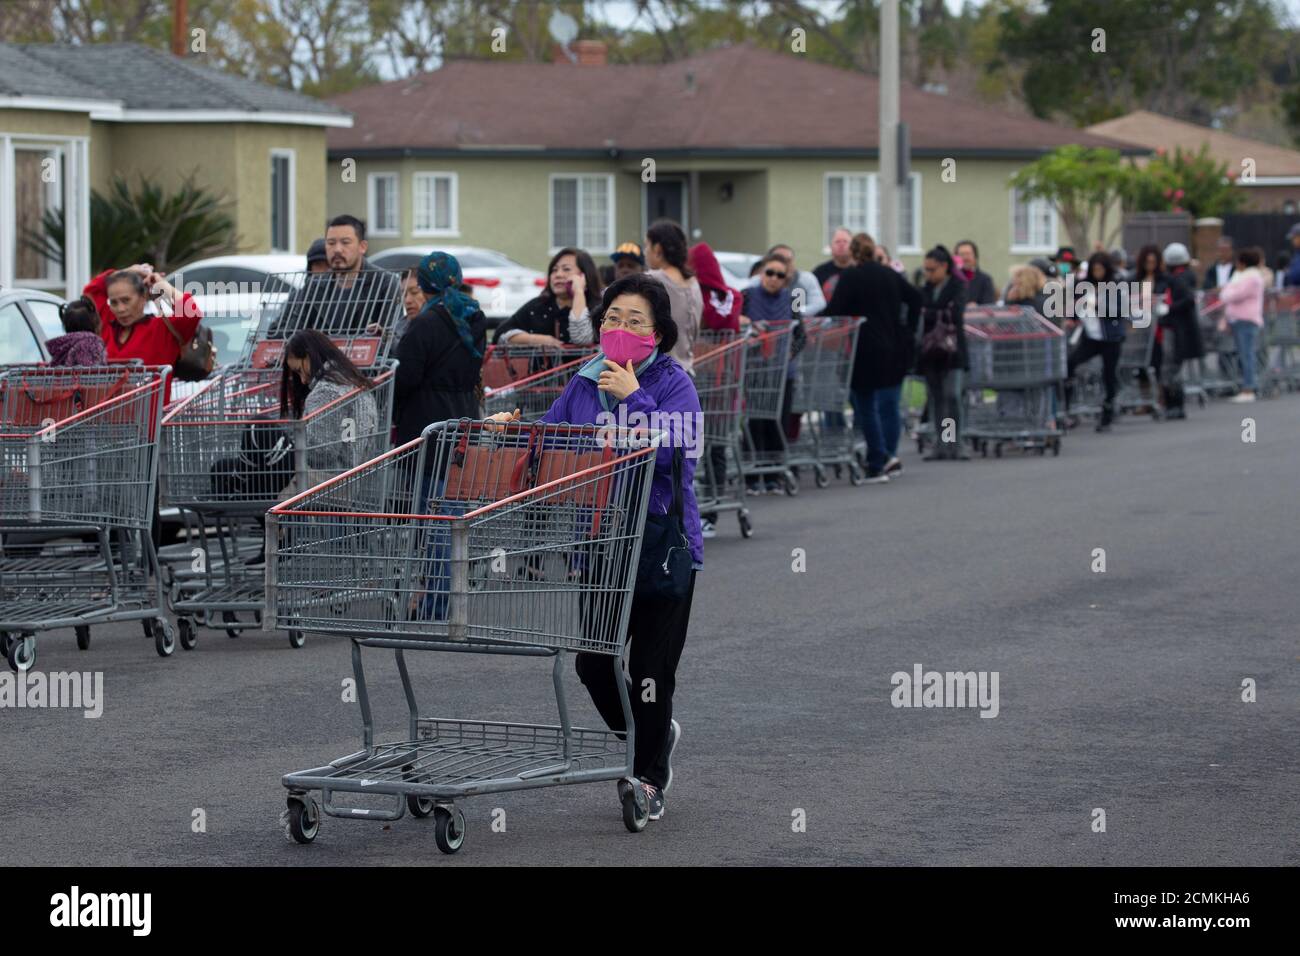 Hundreds Of Shoppers Line Up For Blocks Waiting To Purchase Supplies At A Costco Due To The Global Outbreak Of Coronavirus In Garden Grove California U S March 14 2020 Reuters Mike Blake Stock Photo